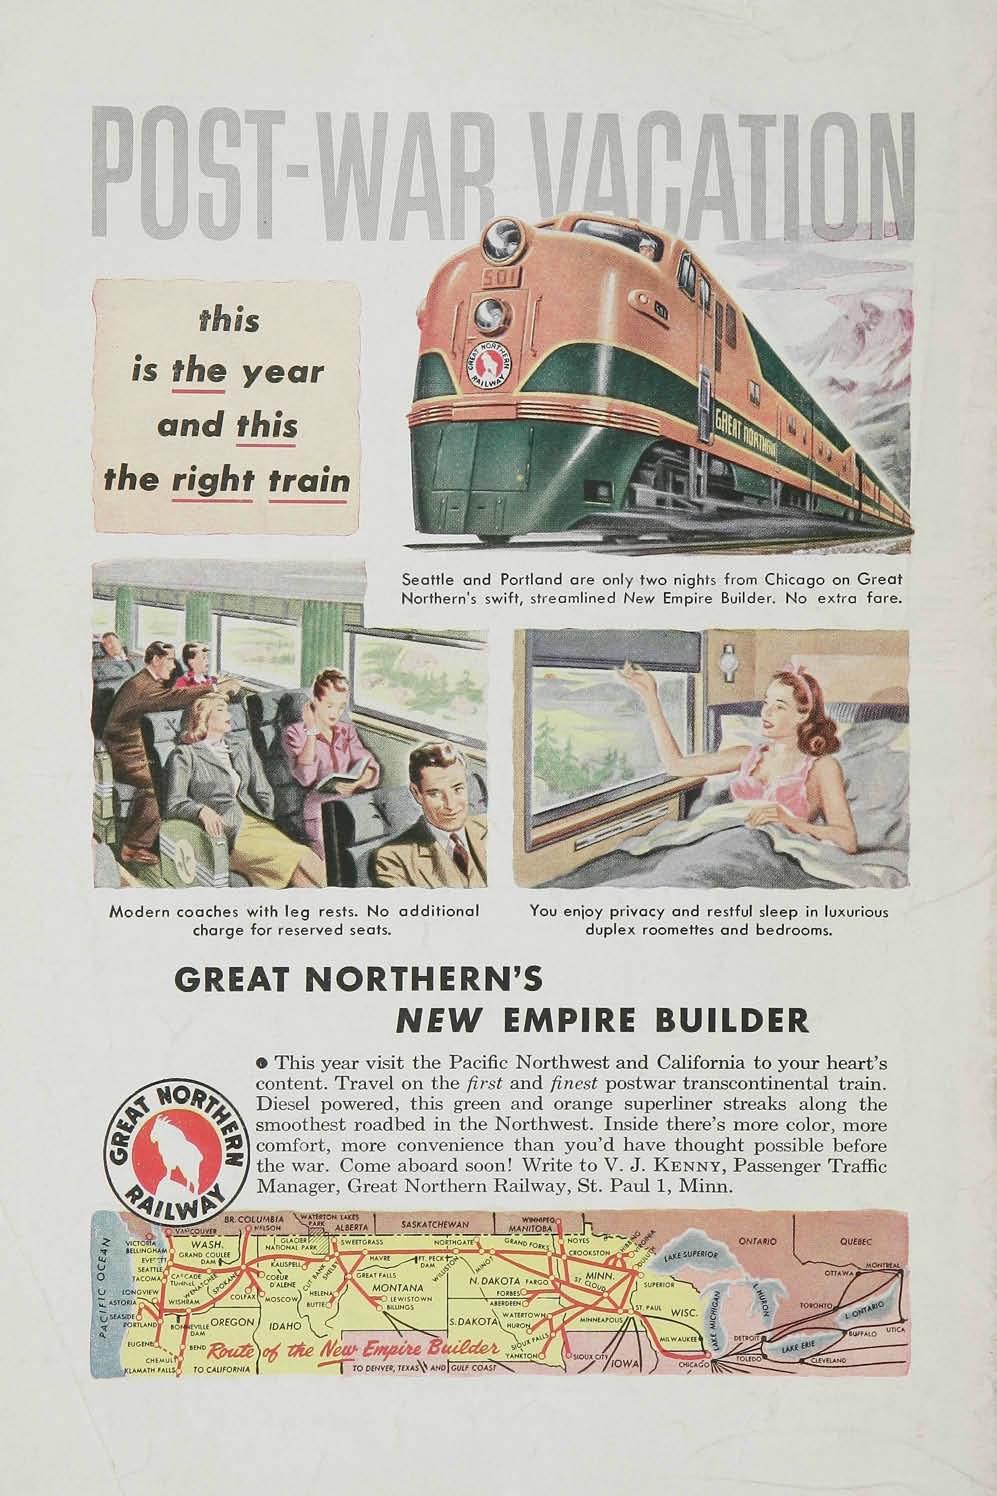 is the year and this the right train Seattle and Portland are only two nights from Chicago on Great Northern's swift, streamlined New Empire Builder. No extra fare. Modern coaches with leg rests.